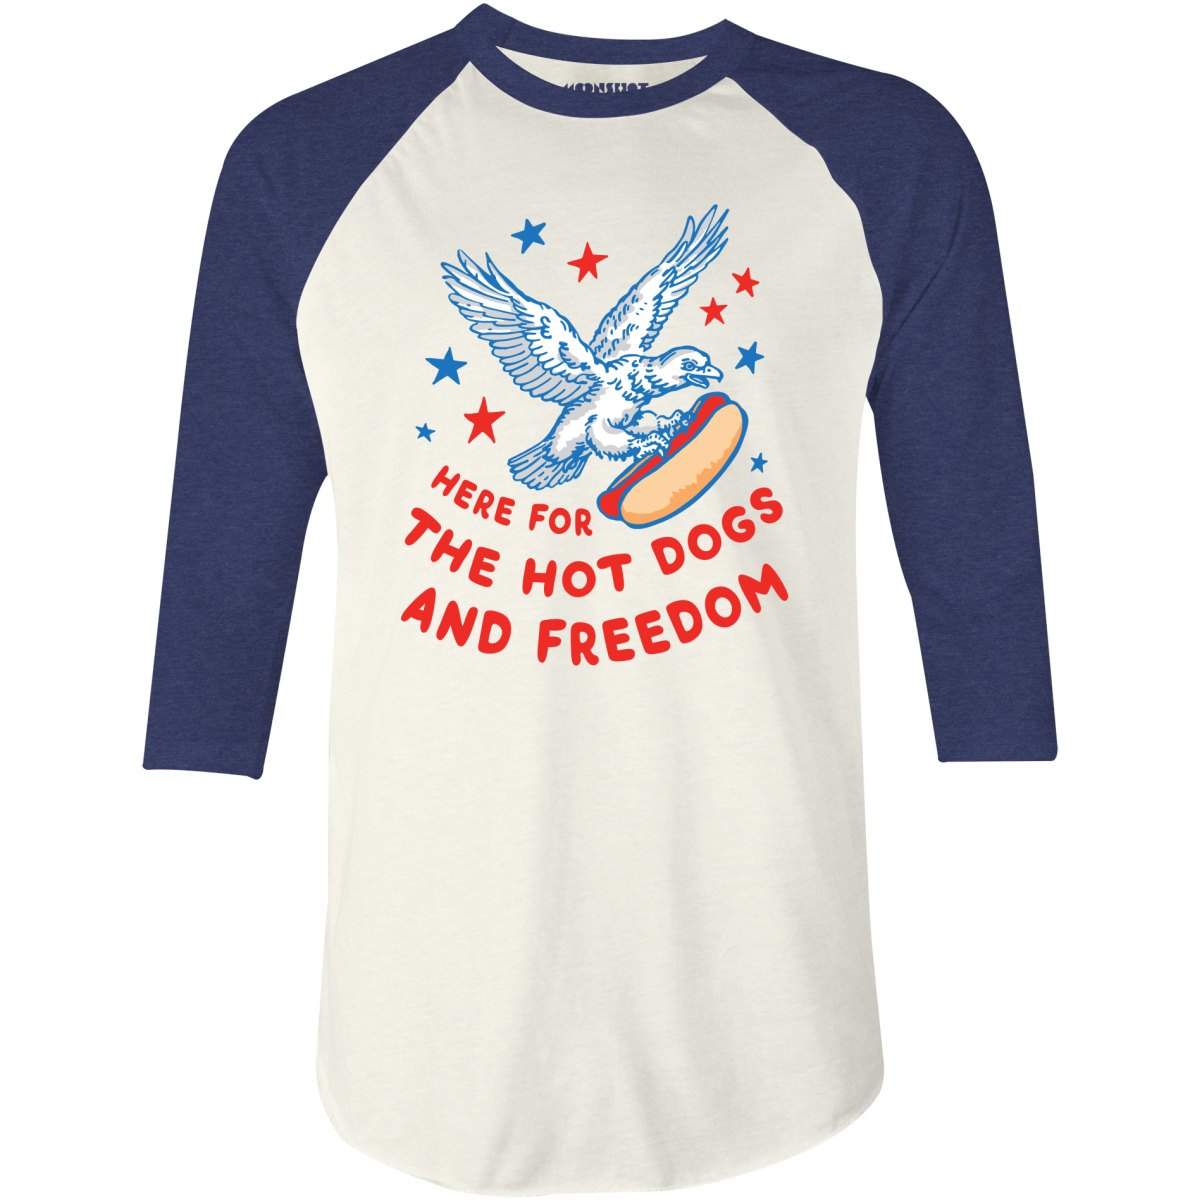 Here For The Hot Dogs and Freedom - 3/4 Sleeve Raglan T-Shirt